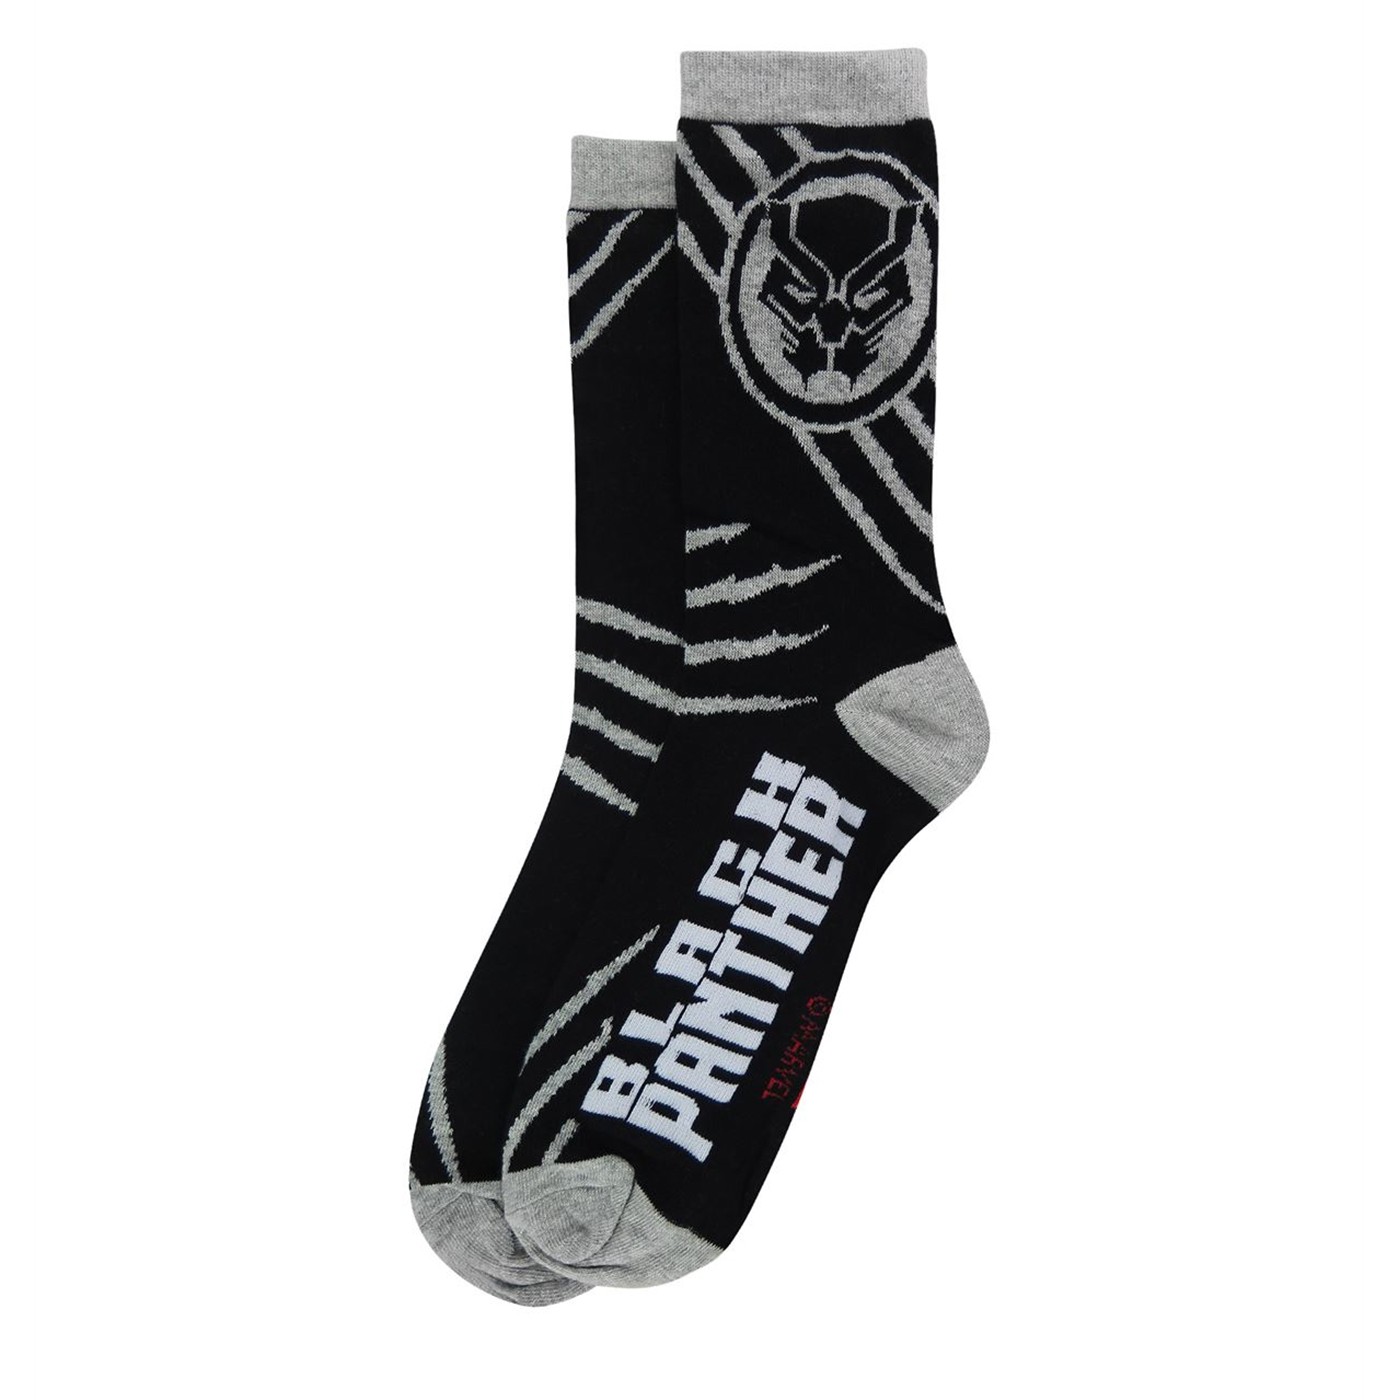 Black Panther Icon & Claws Crew Socks